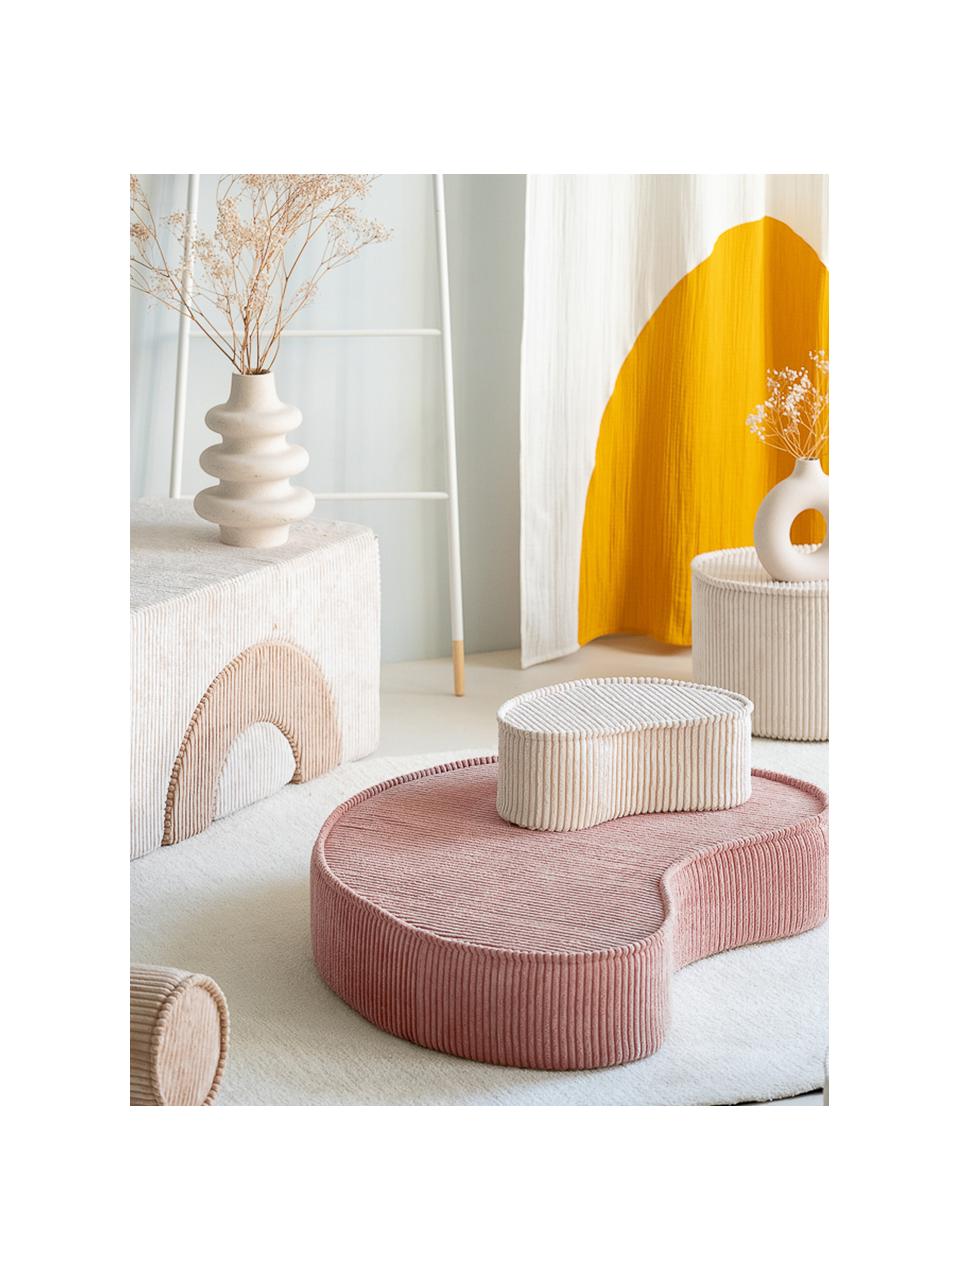 Pouf per bambini in velluto a coste Beans, Rivestimento: velluto a coste (100% pol, Velluto a coste rosa cipria, Larg. 95 x Prof. 78 cm